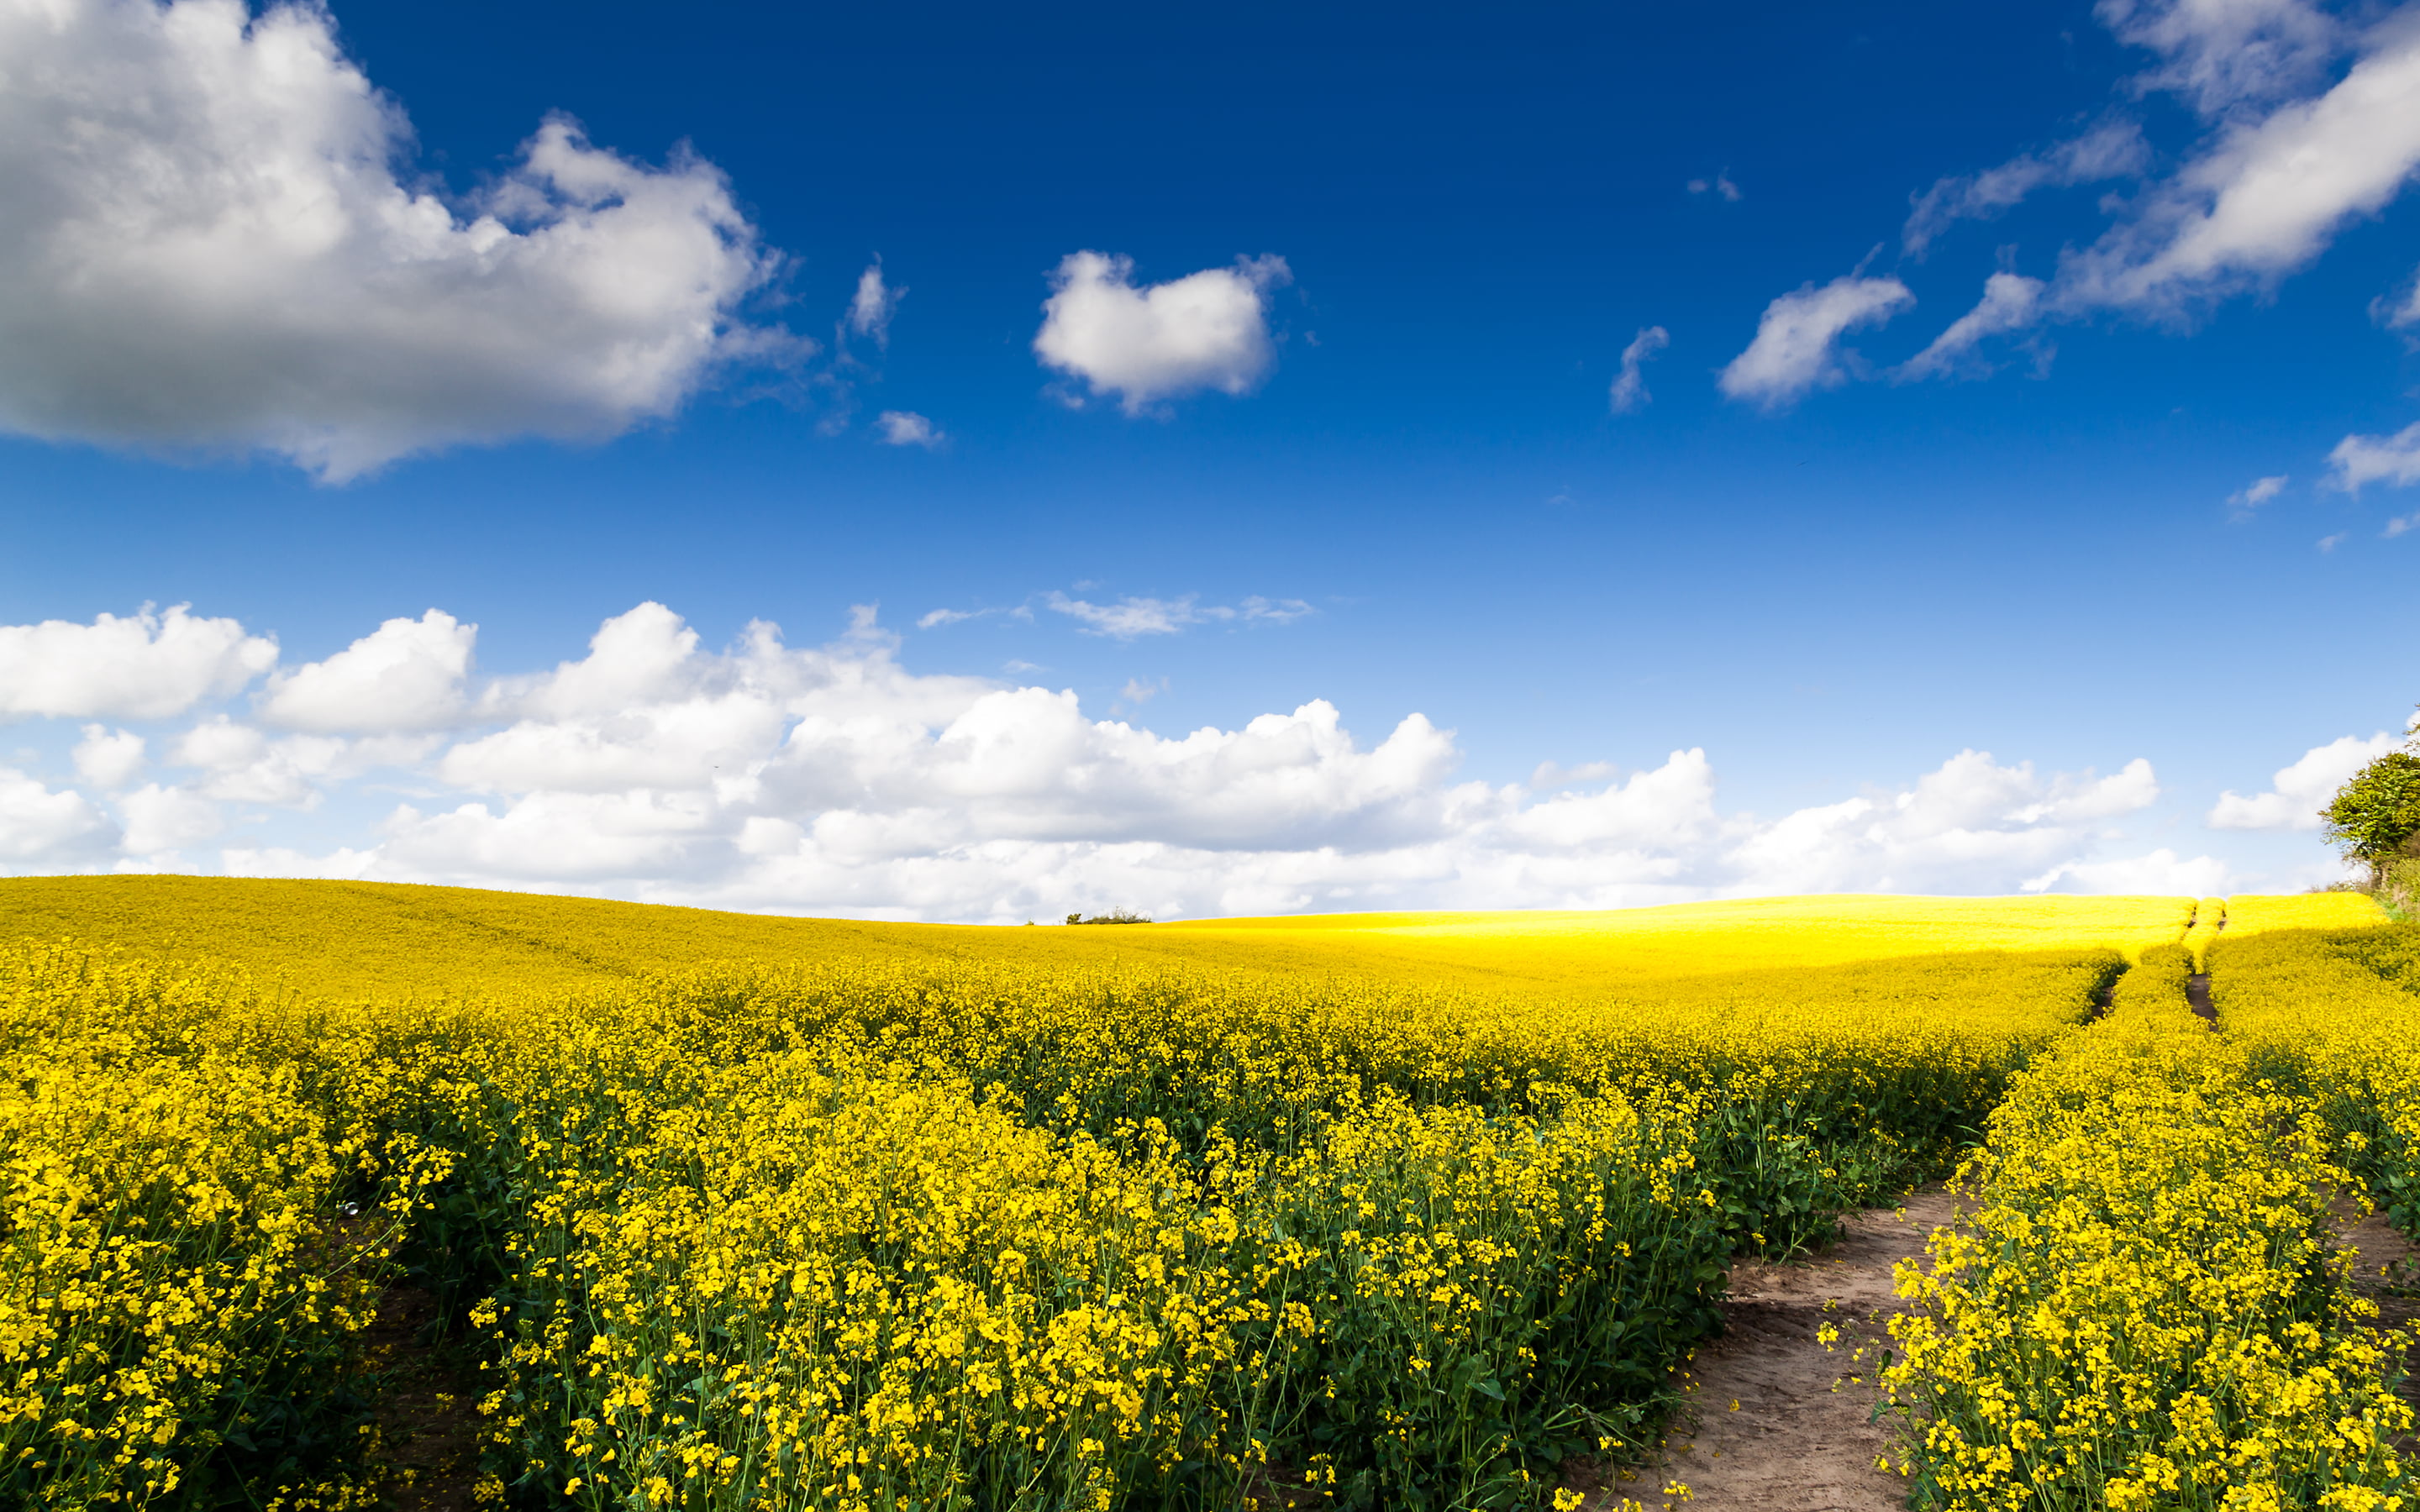 yellow petaled flowers with green leaves field under the blue and white cloudy sky